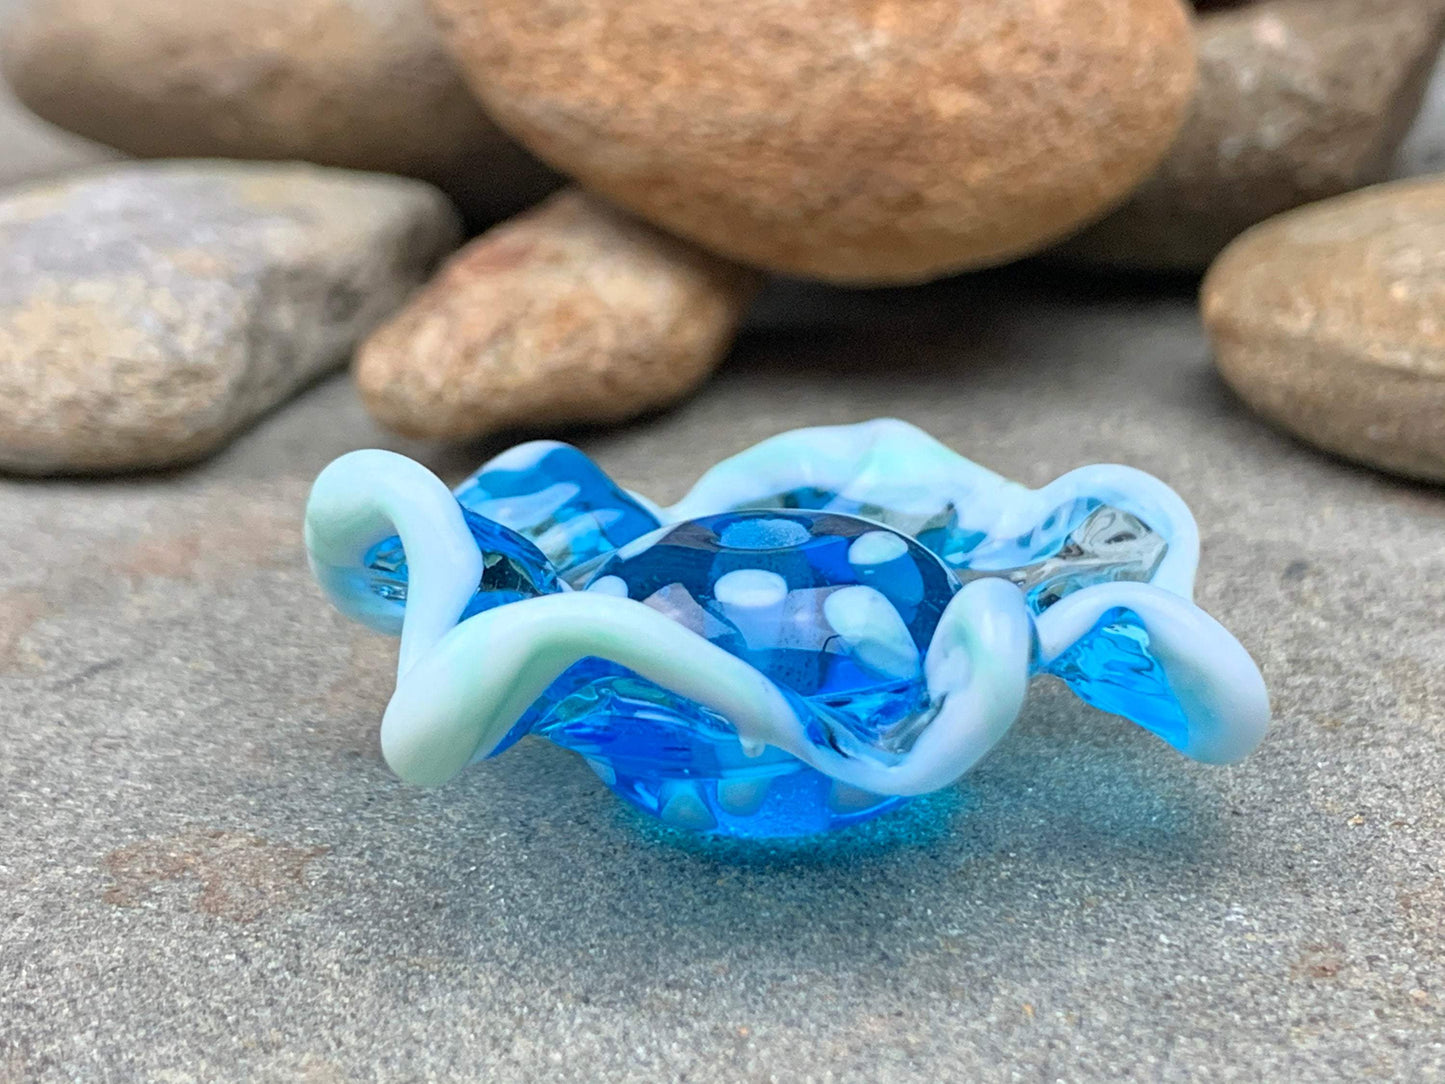 a handmade lampworked blue glass bead with a blue glass ruffle with white dots around the middle of the bead.